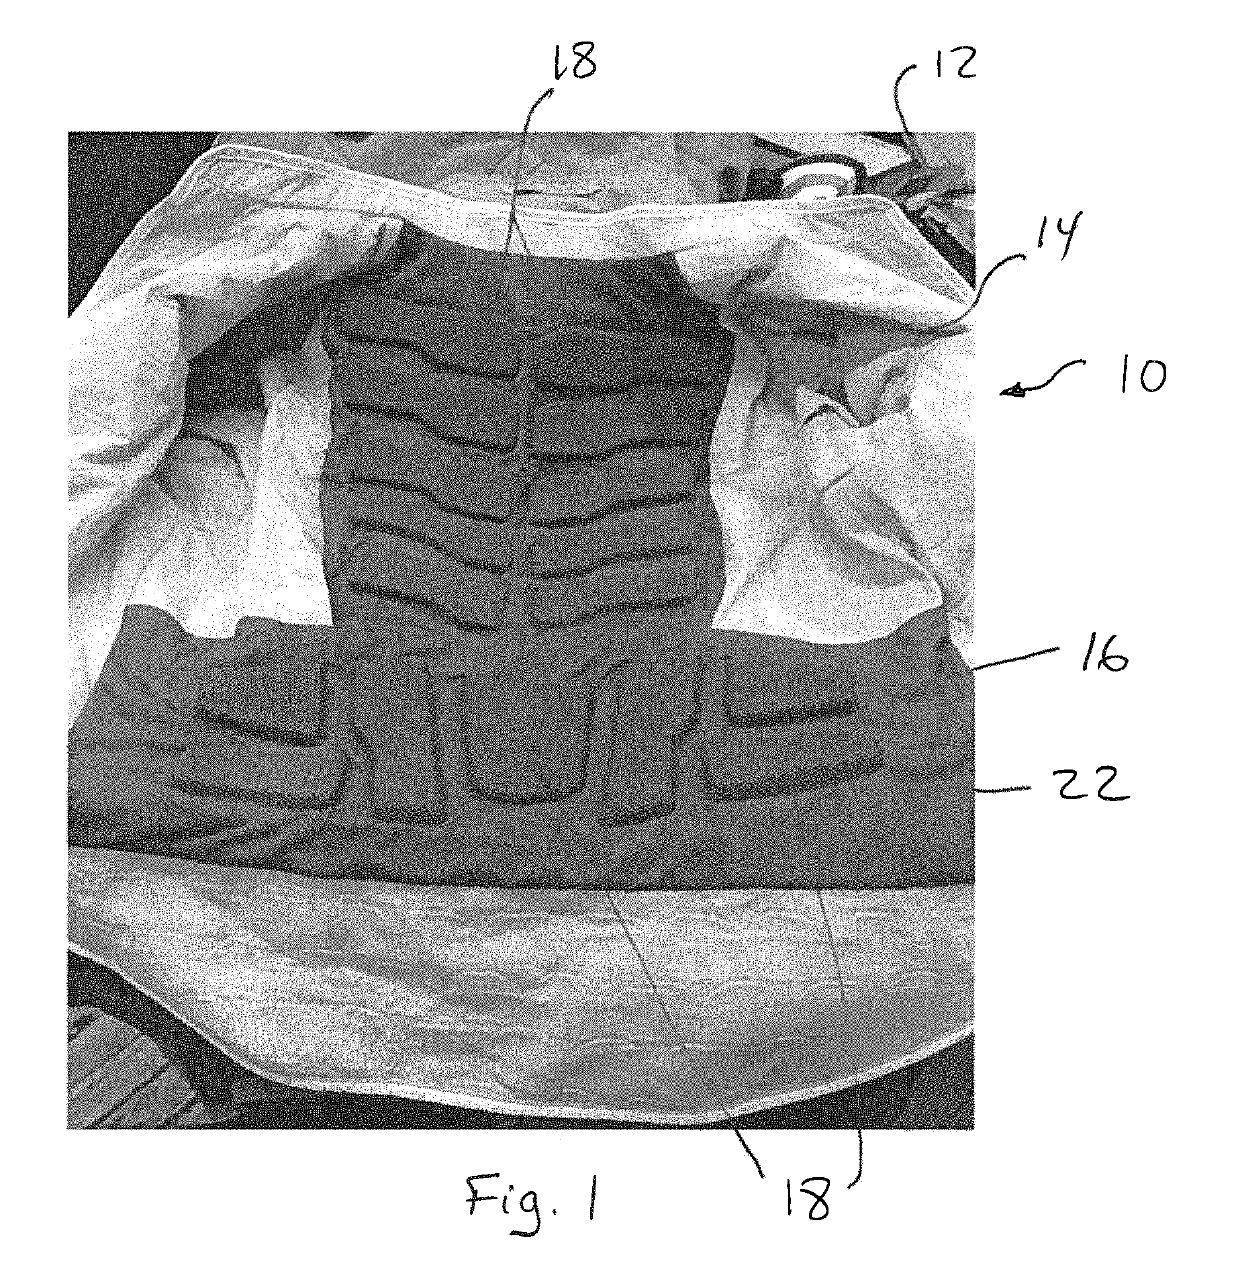 Firefighter protective garment having a thermal barrier with spacers to increase dissipation of metabolic heat